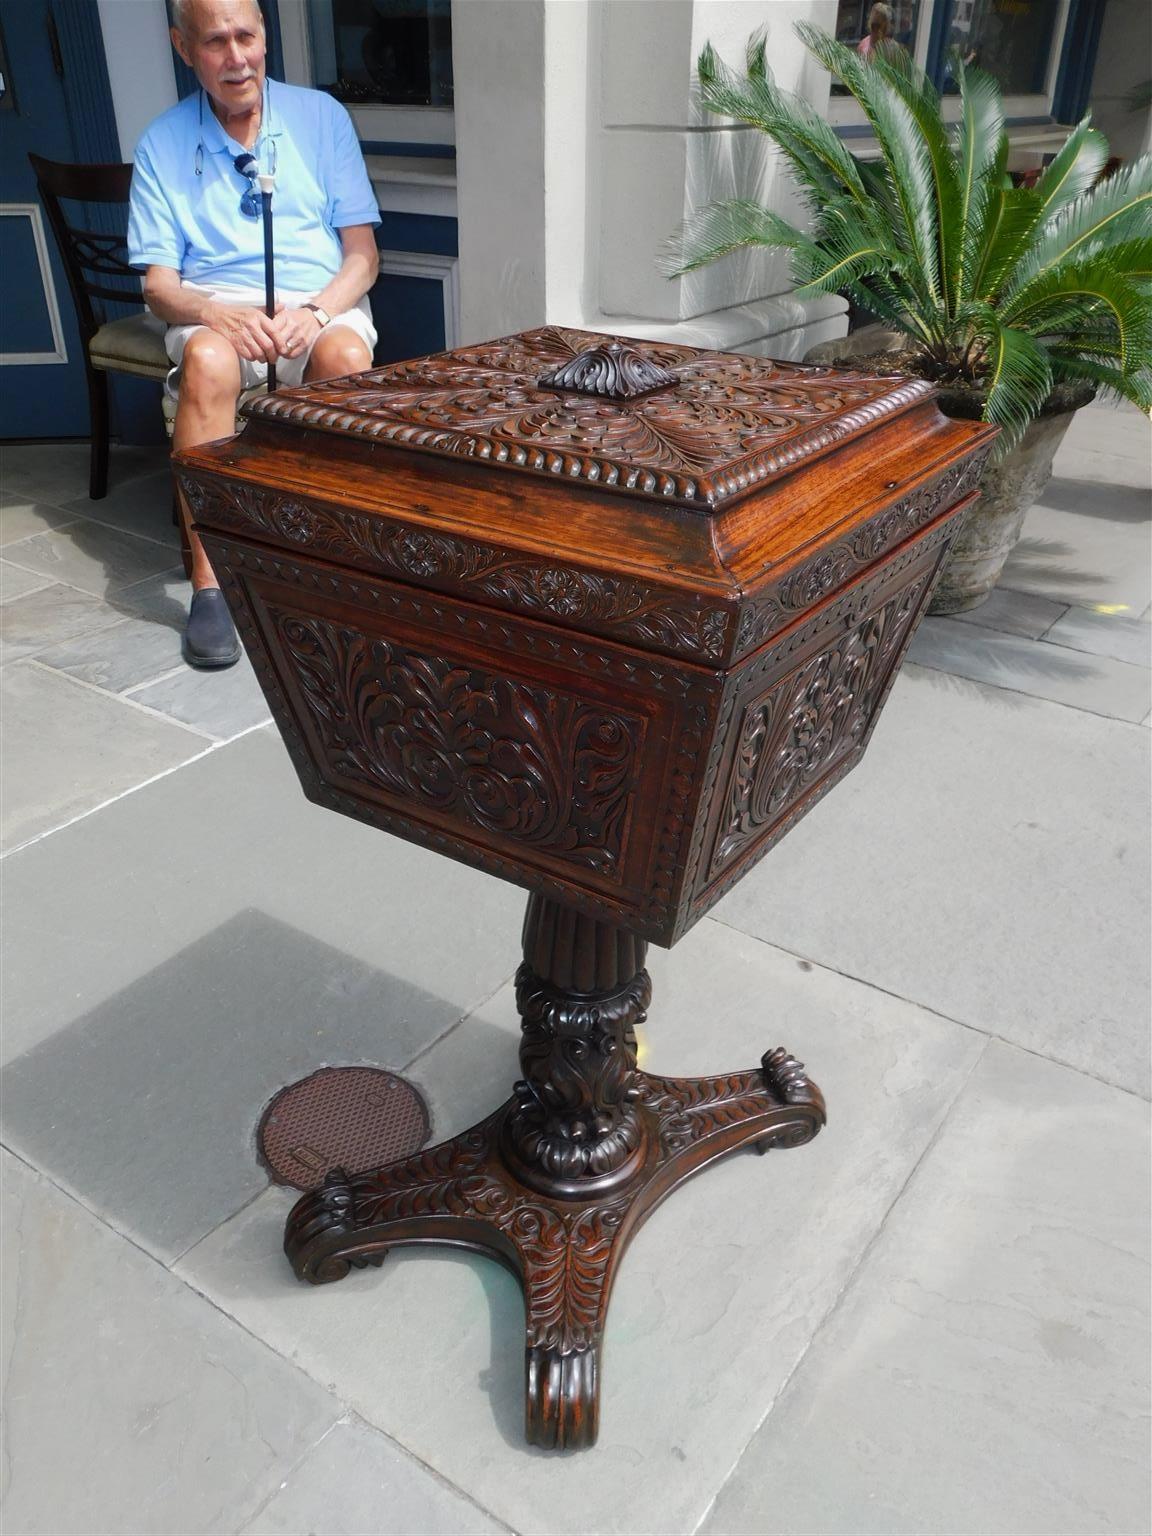 Anglo-Indian Caribbean Mahogany Hinged Pedestal Tea Poy with Foliage Carvings, Circa 1820 For Sale